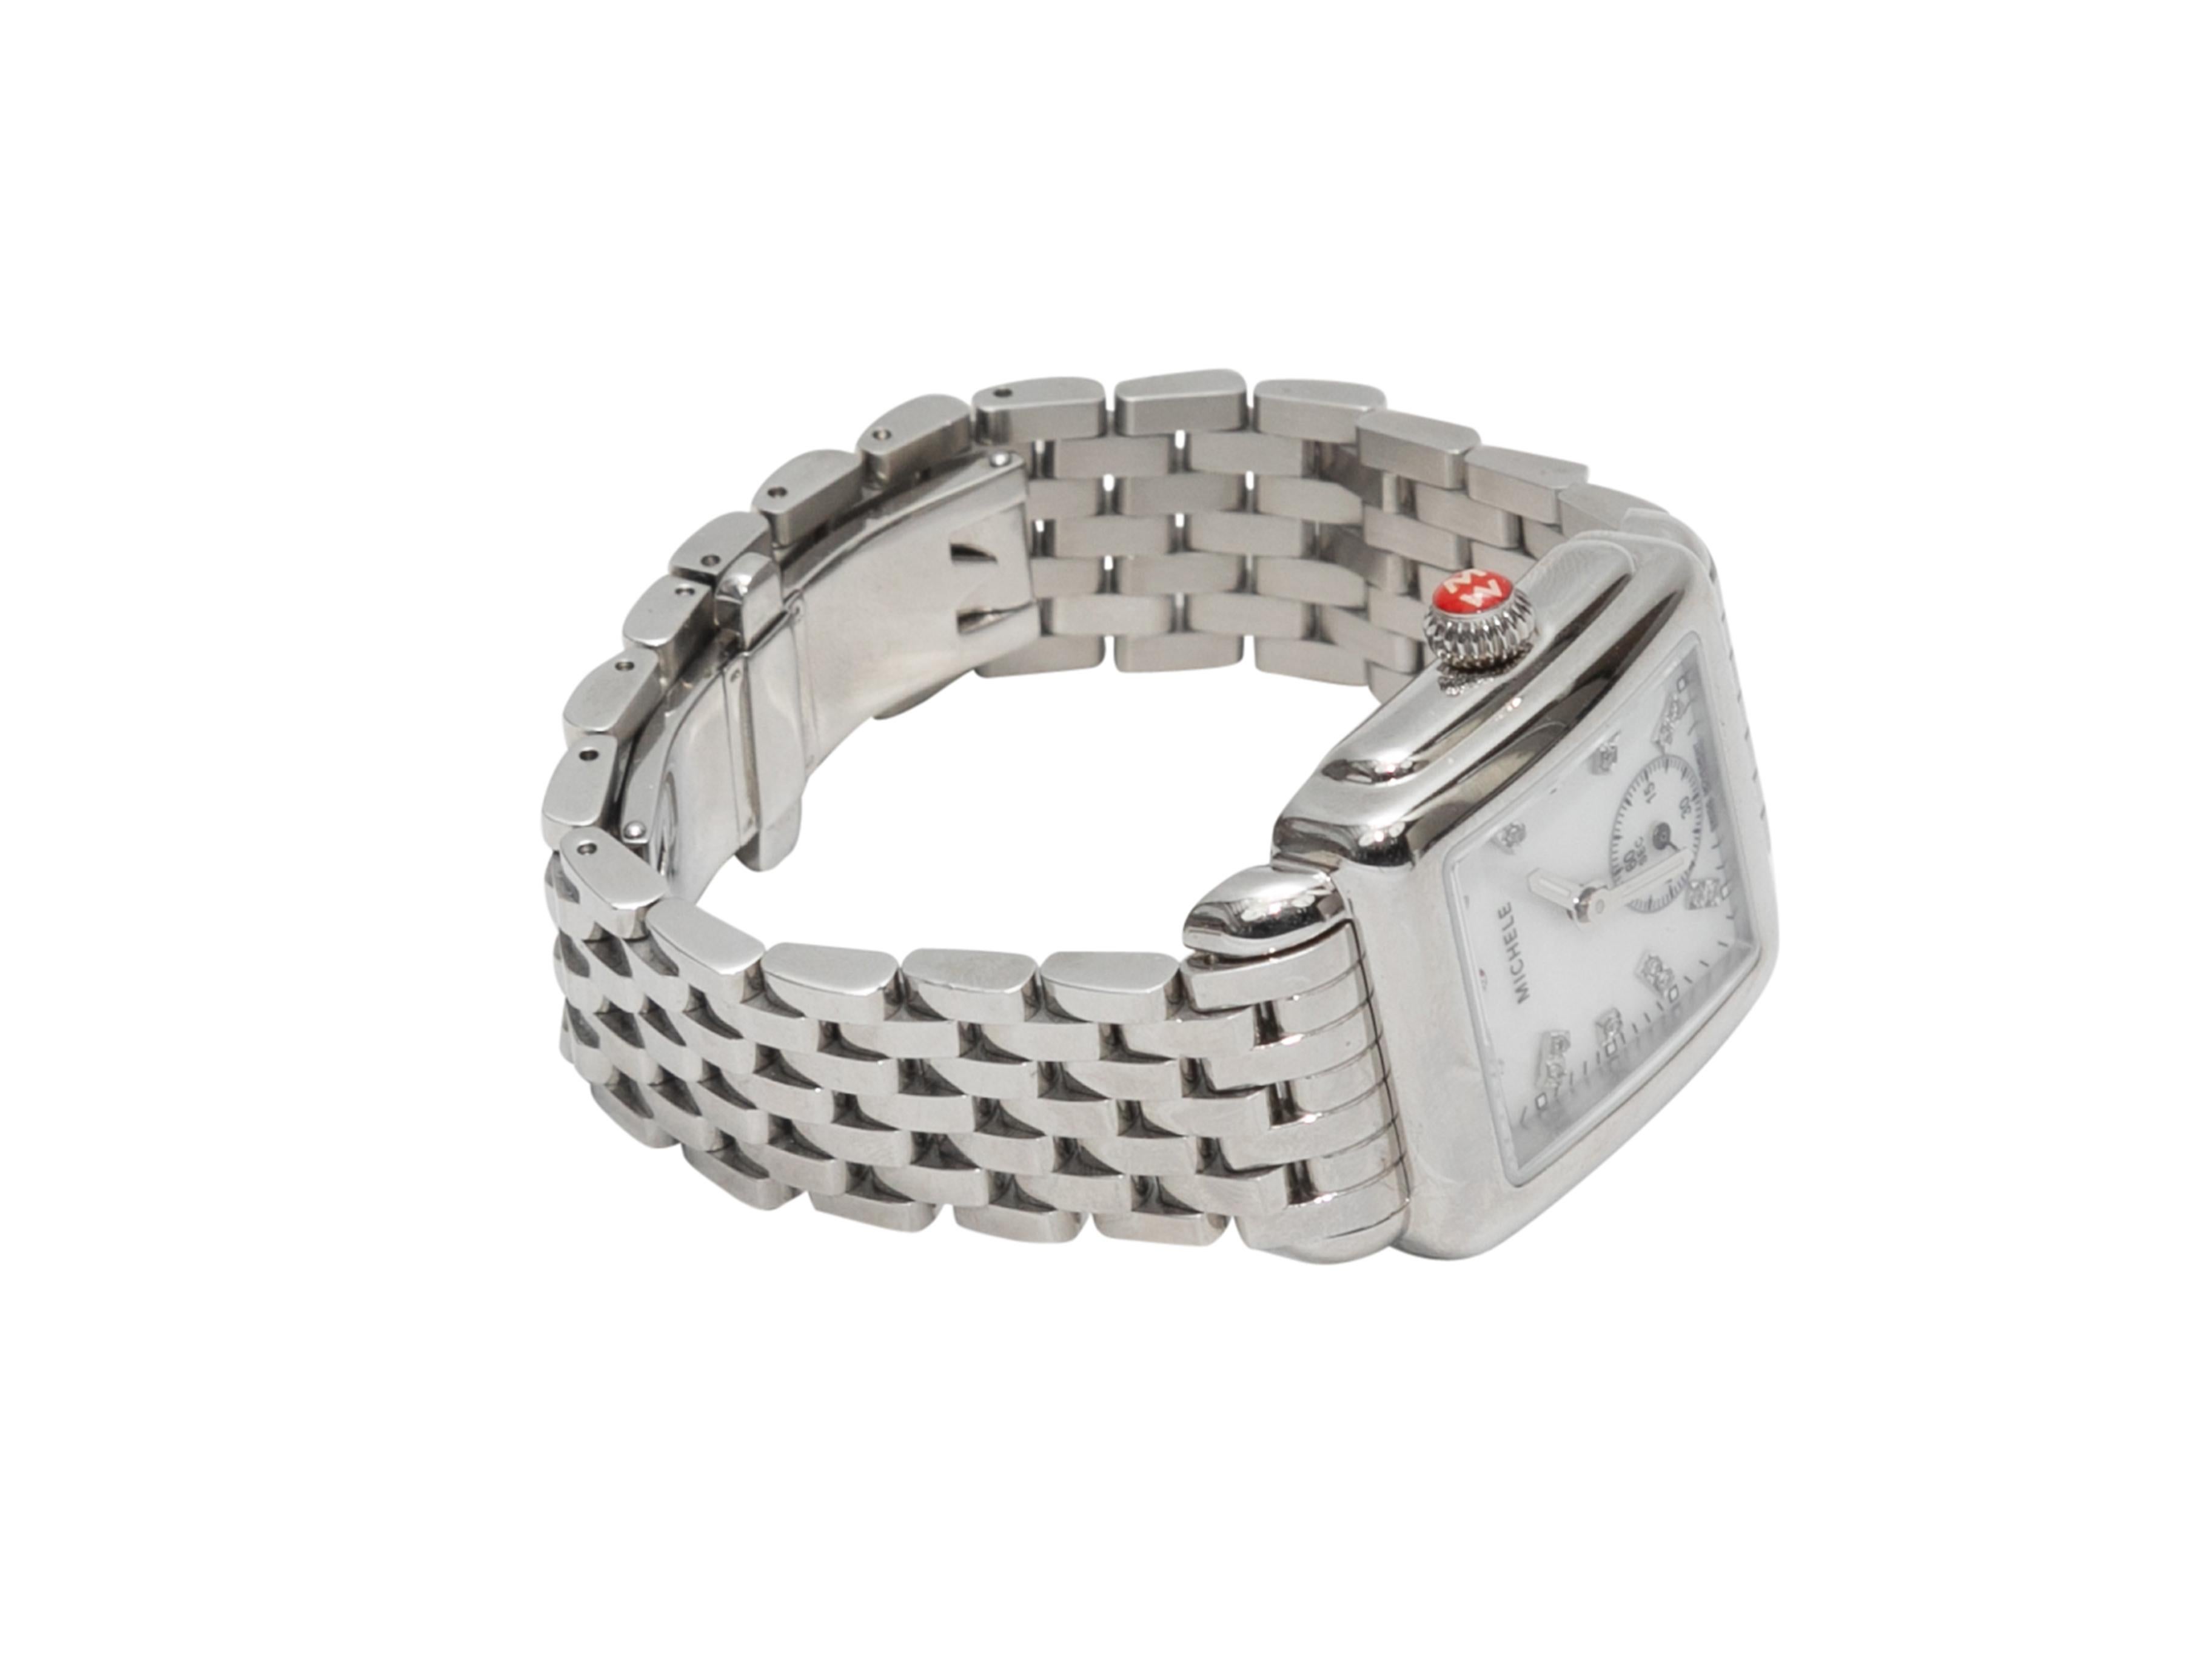 Silver-tone Deco watch by Michele. Diamond hour markings. Clasp closure. 1.5